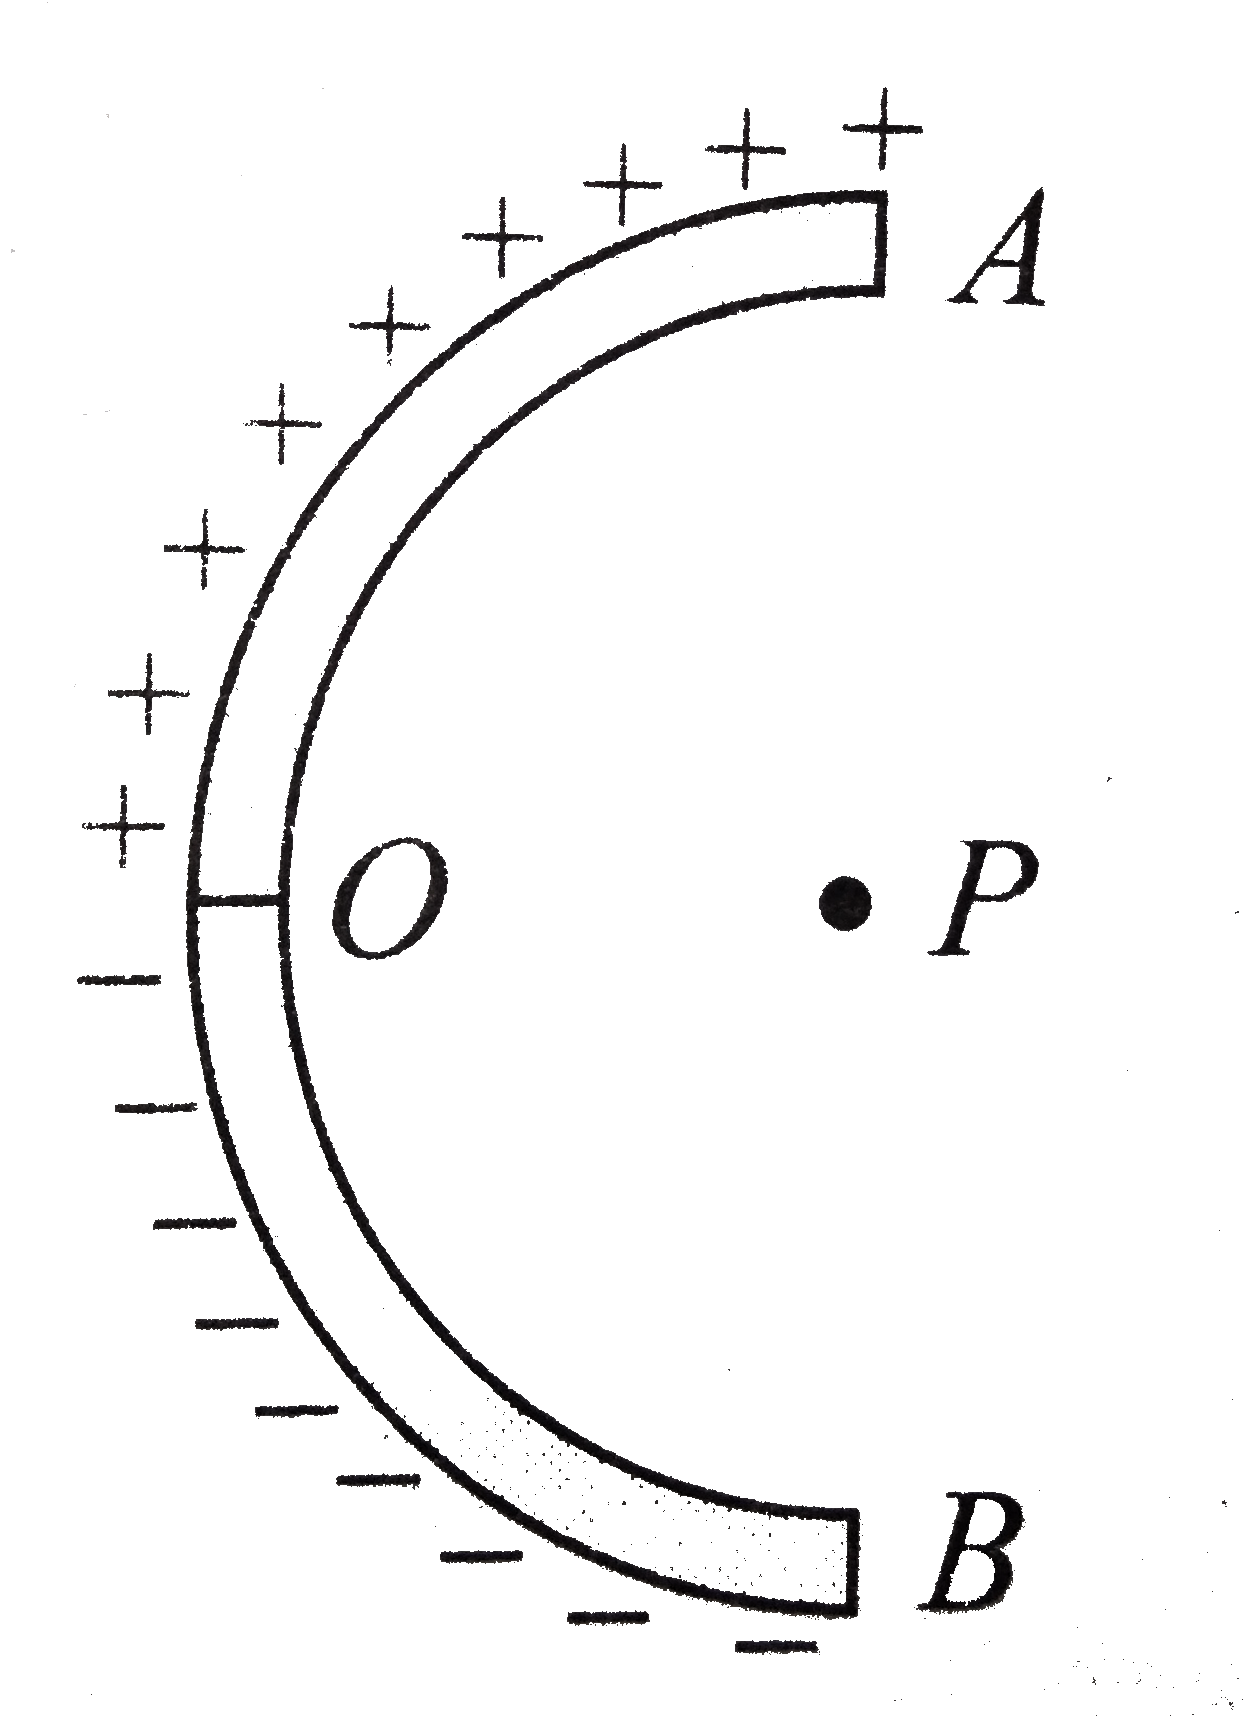 A thin glass rod is bent into a semicircle of radius r. A charge +Q is uniformly distributed along the upper half and a charge -Q is uniformly distributed along the lower half, as shown in fig. The electric field E at P, the center of the semicircle, is